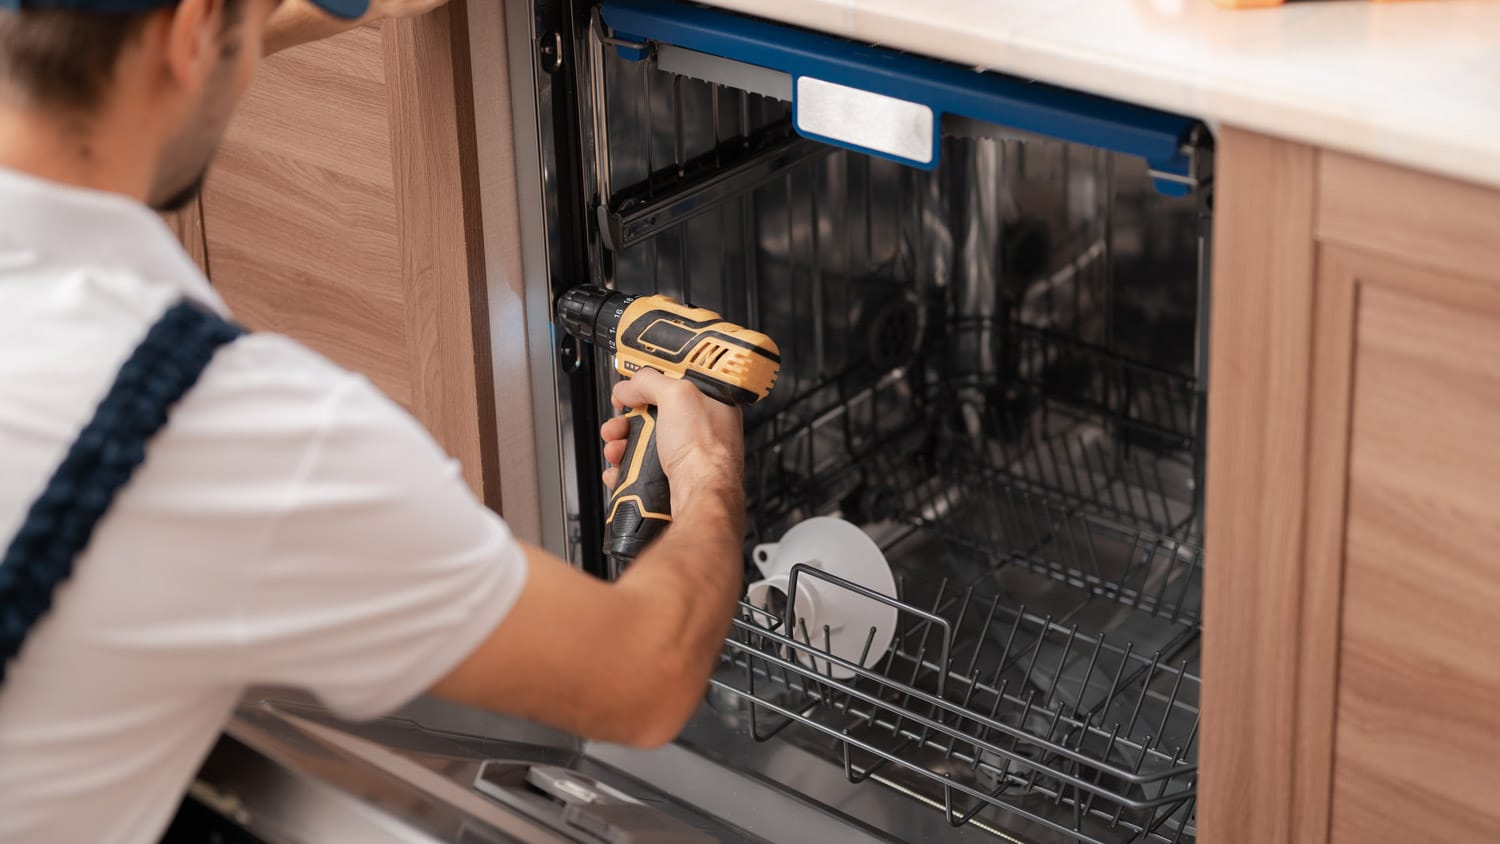 How to Plumb a Dishwasher